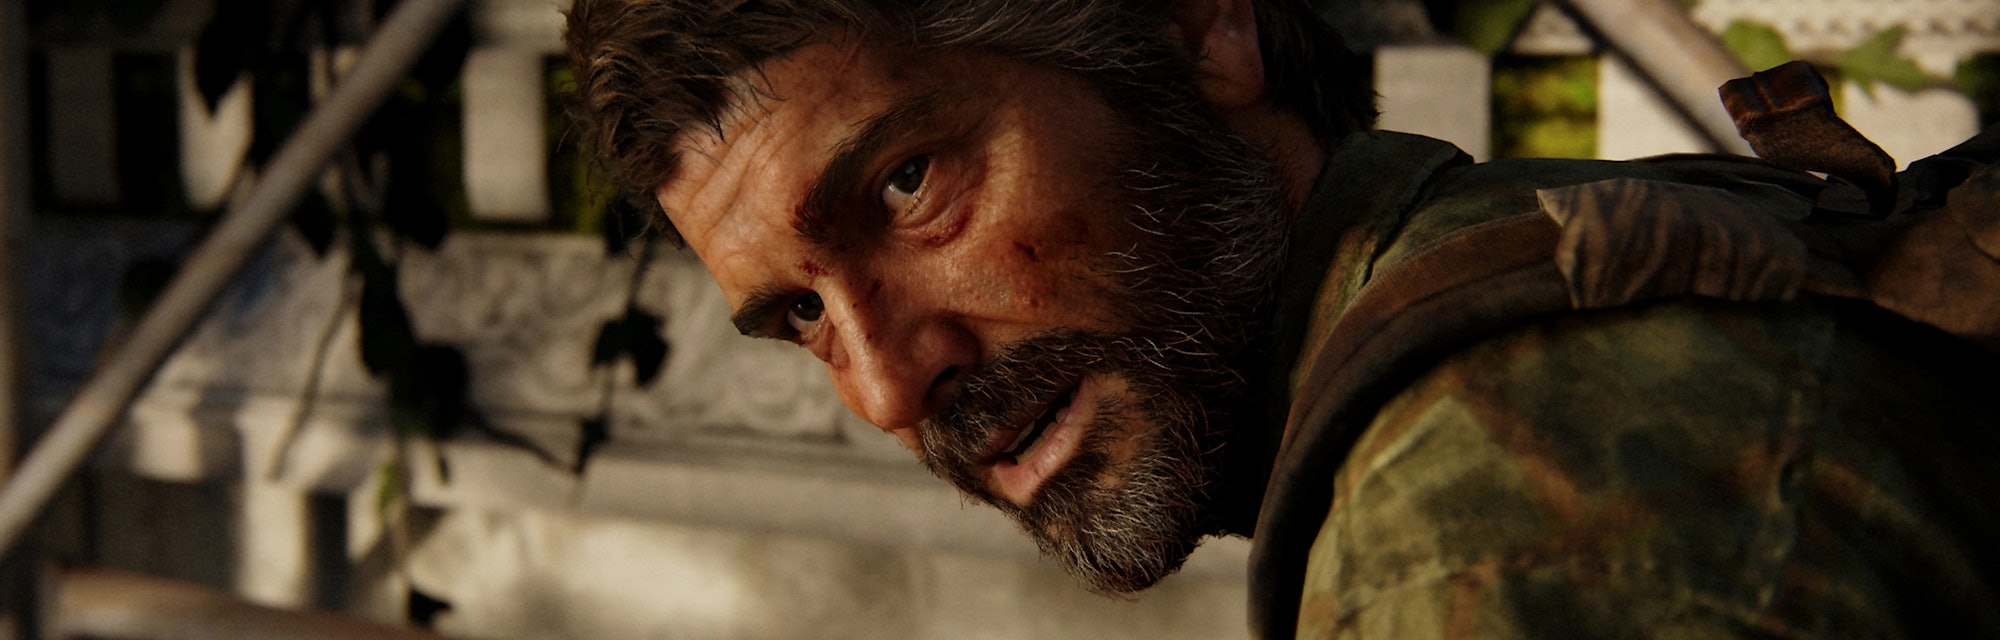 Joel in The Last of Us Part I.